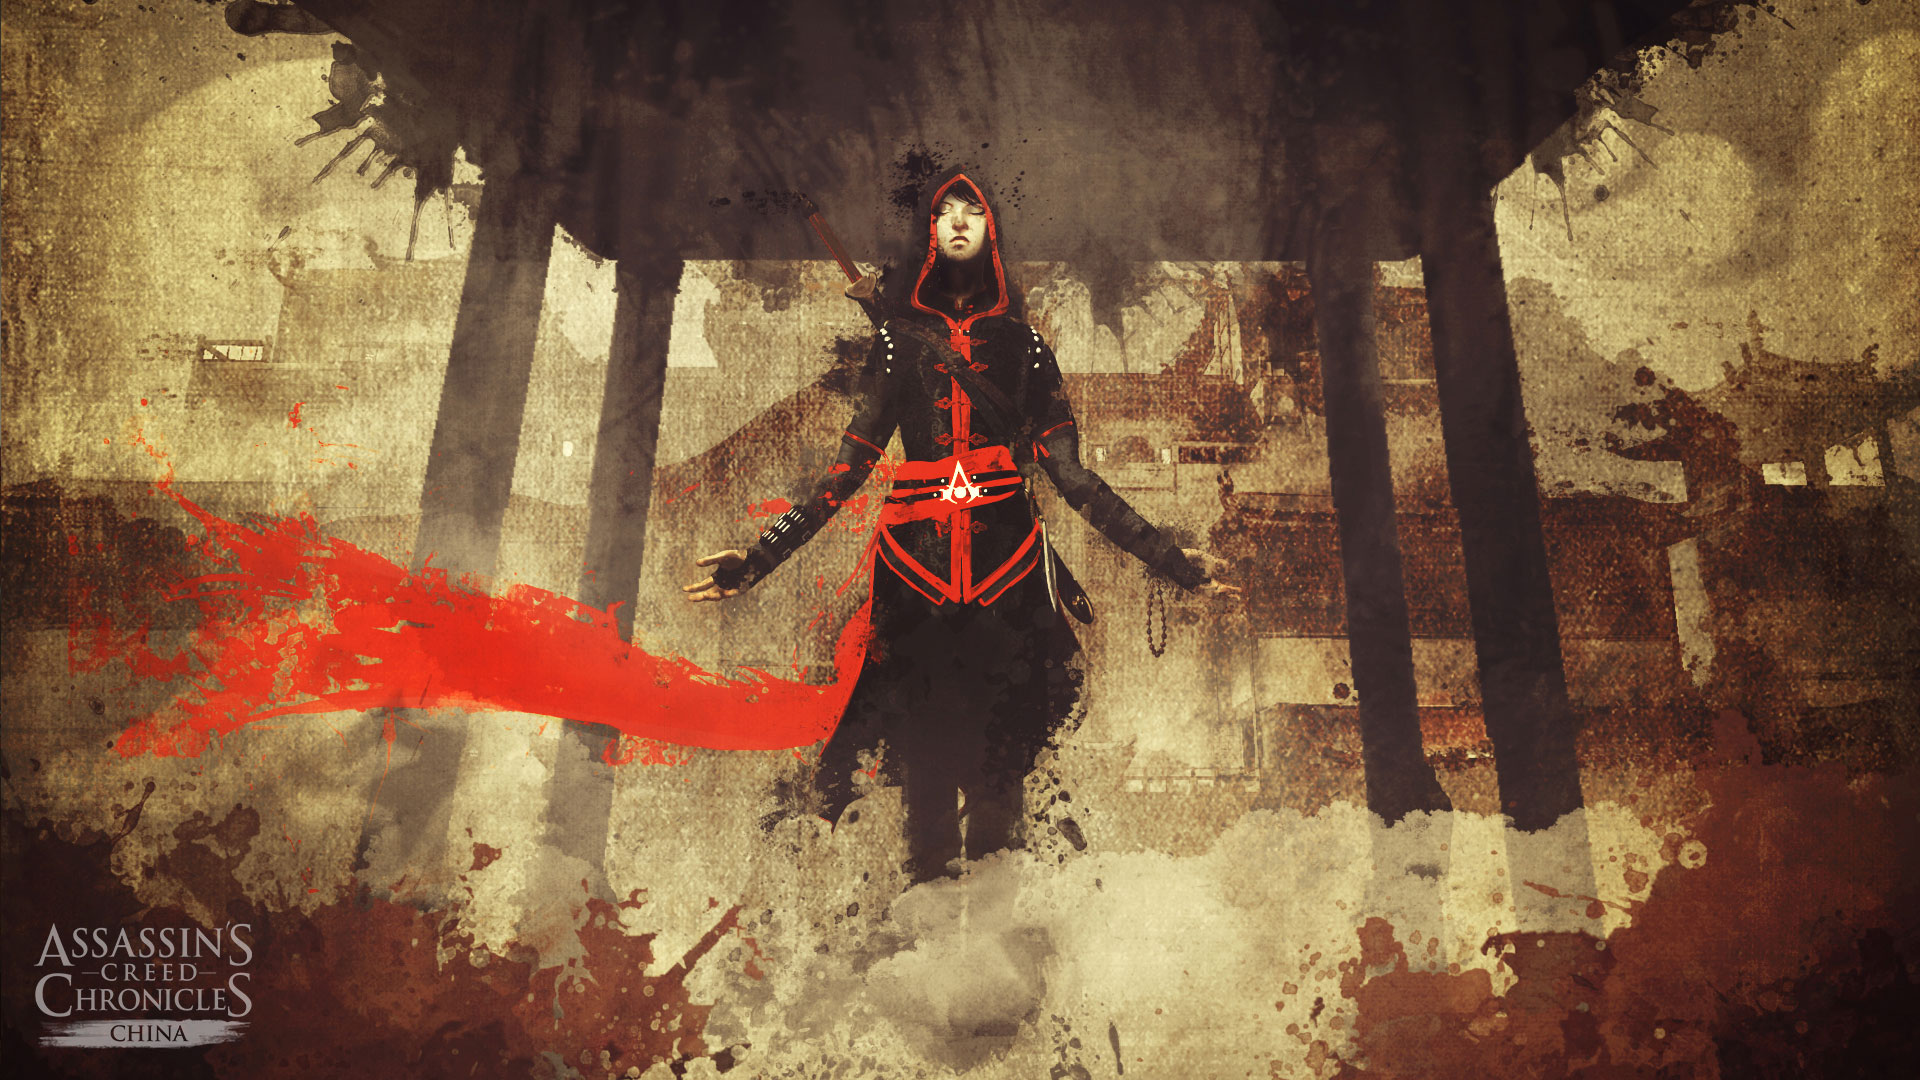 Review: Assassin's Creed Chronicles: China